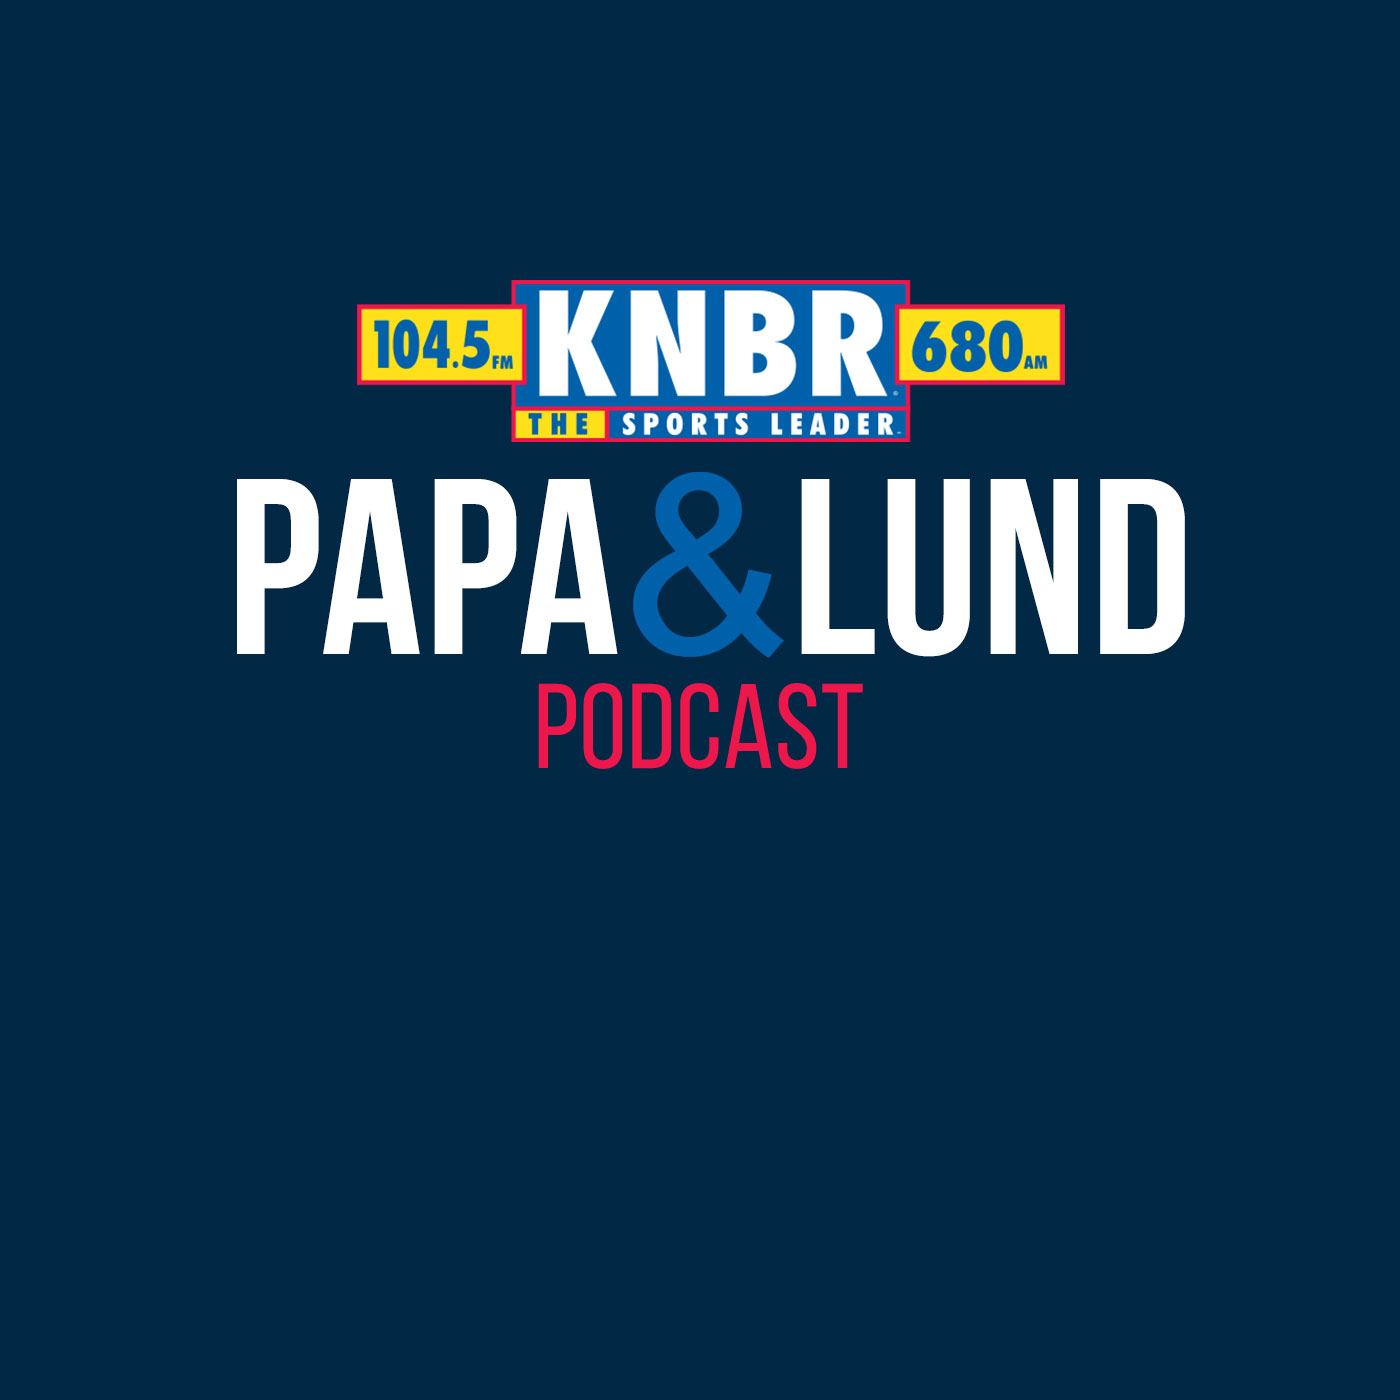 10-30 David Lombardi joins Papa & Lund to discuss the another bad performance from the 49ers and if this adds a sense of urgency to add at the Trade Deadline